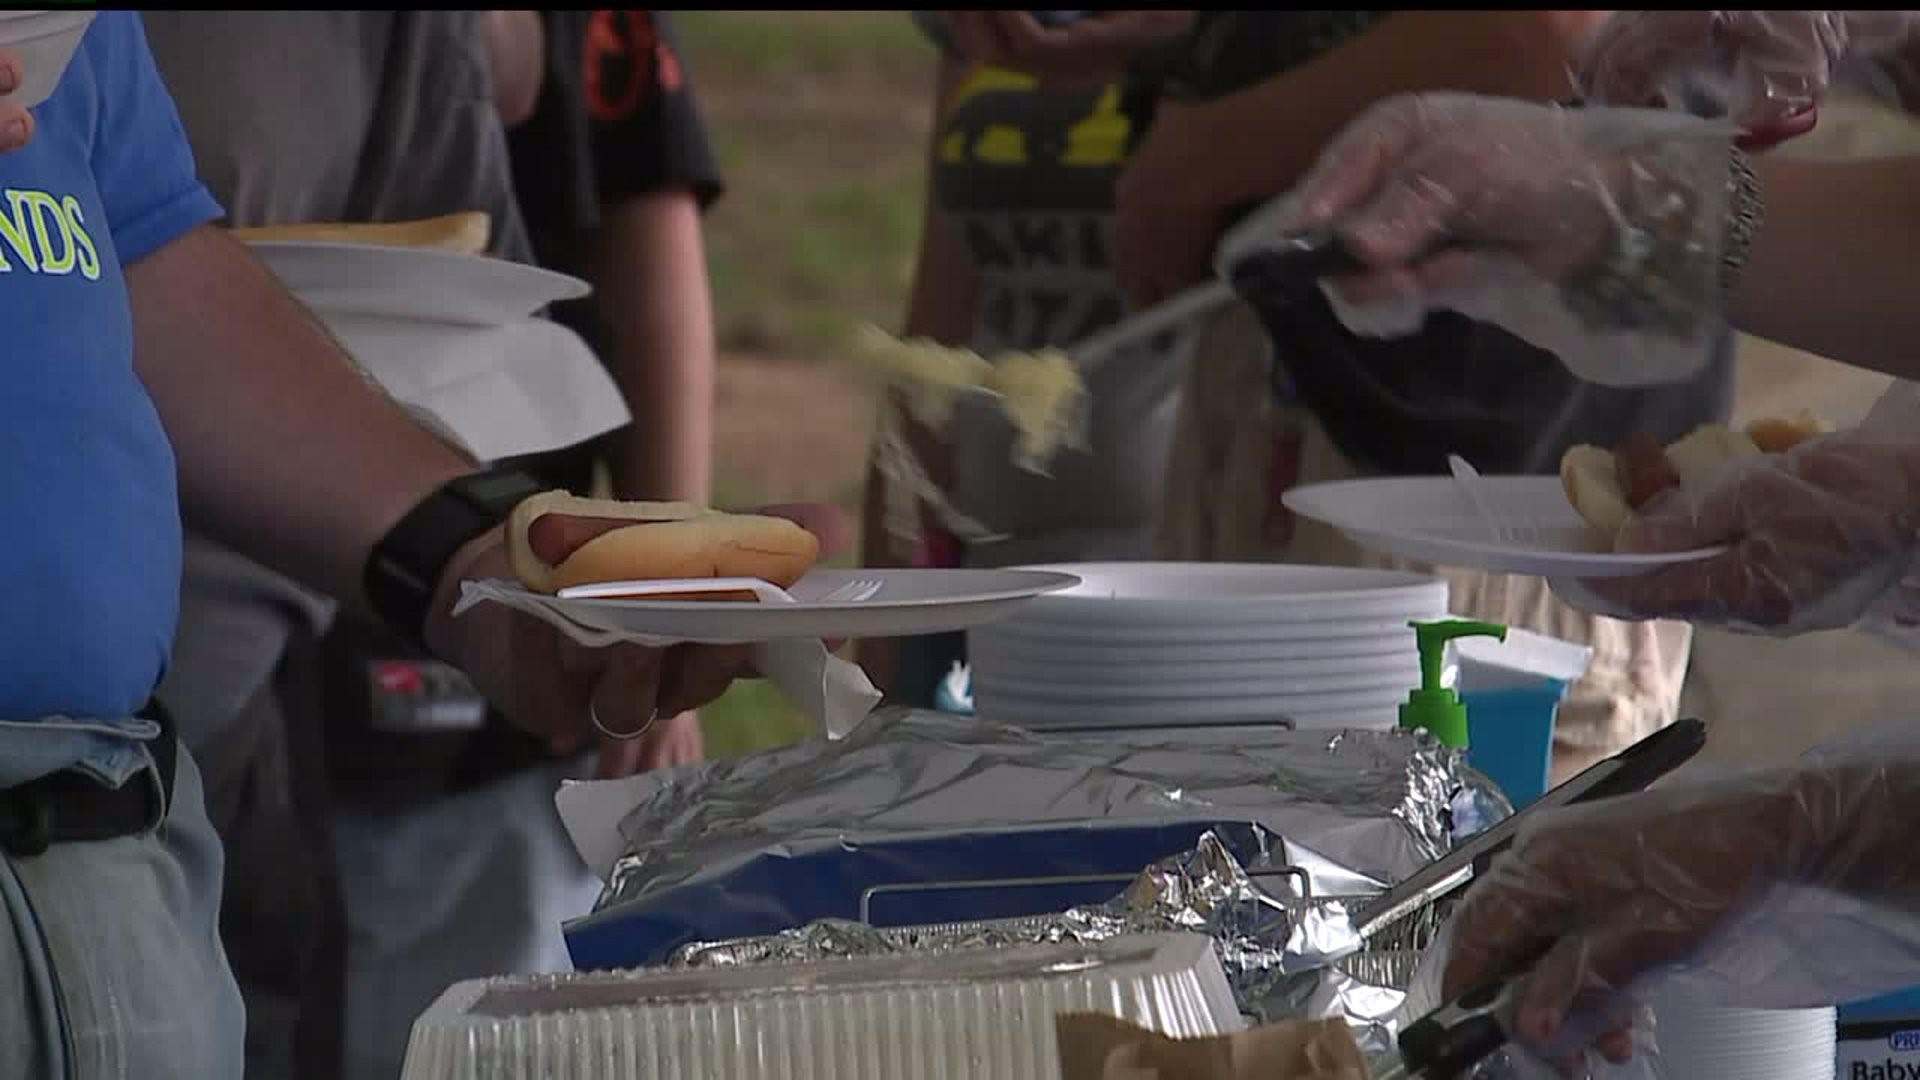 Hungry and homeless in York can receive free weekend meals through August